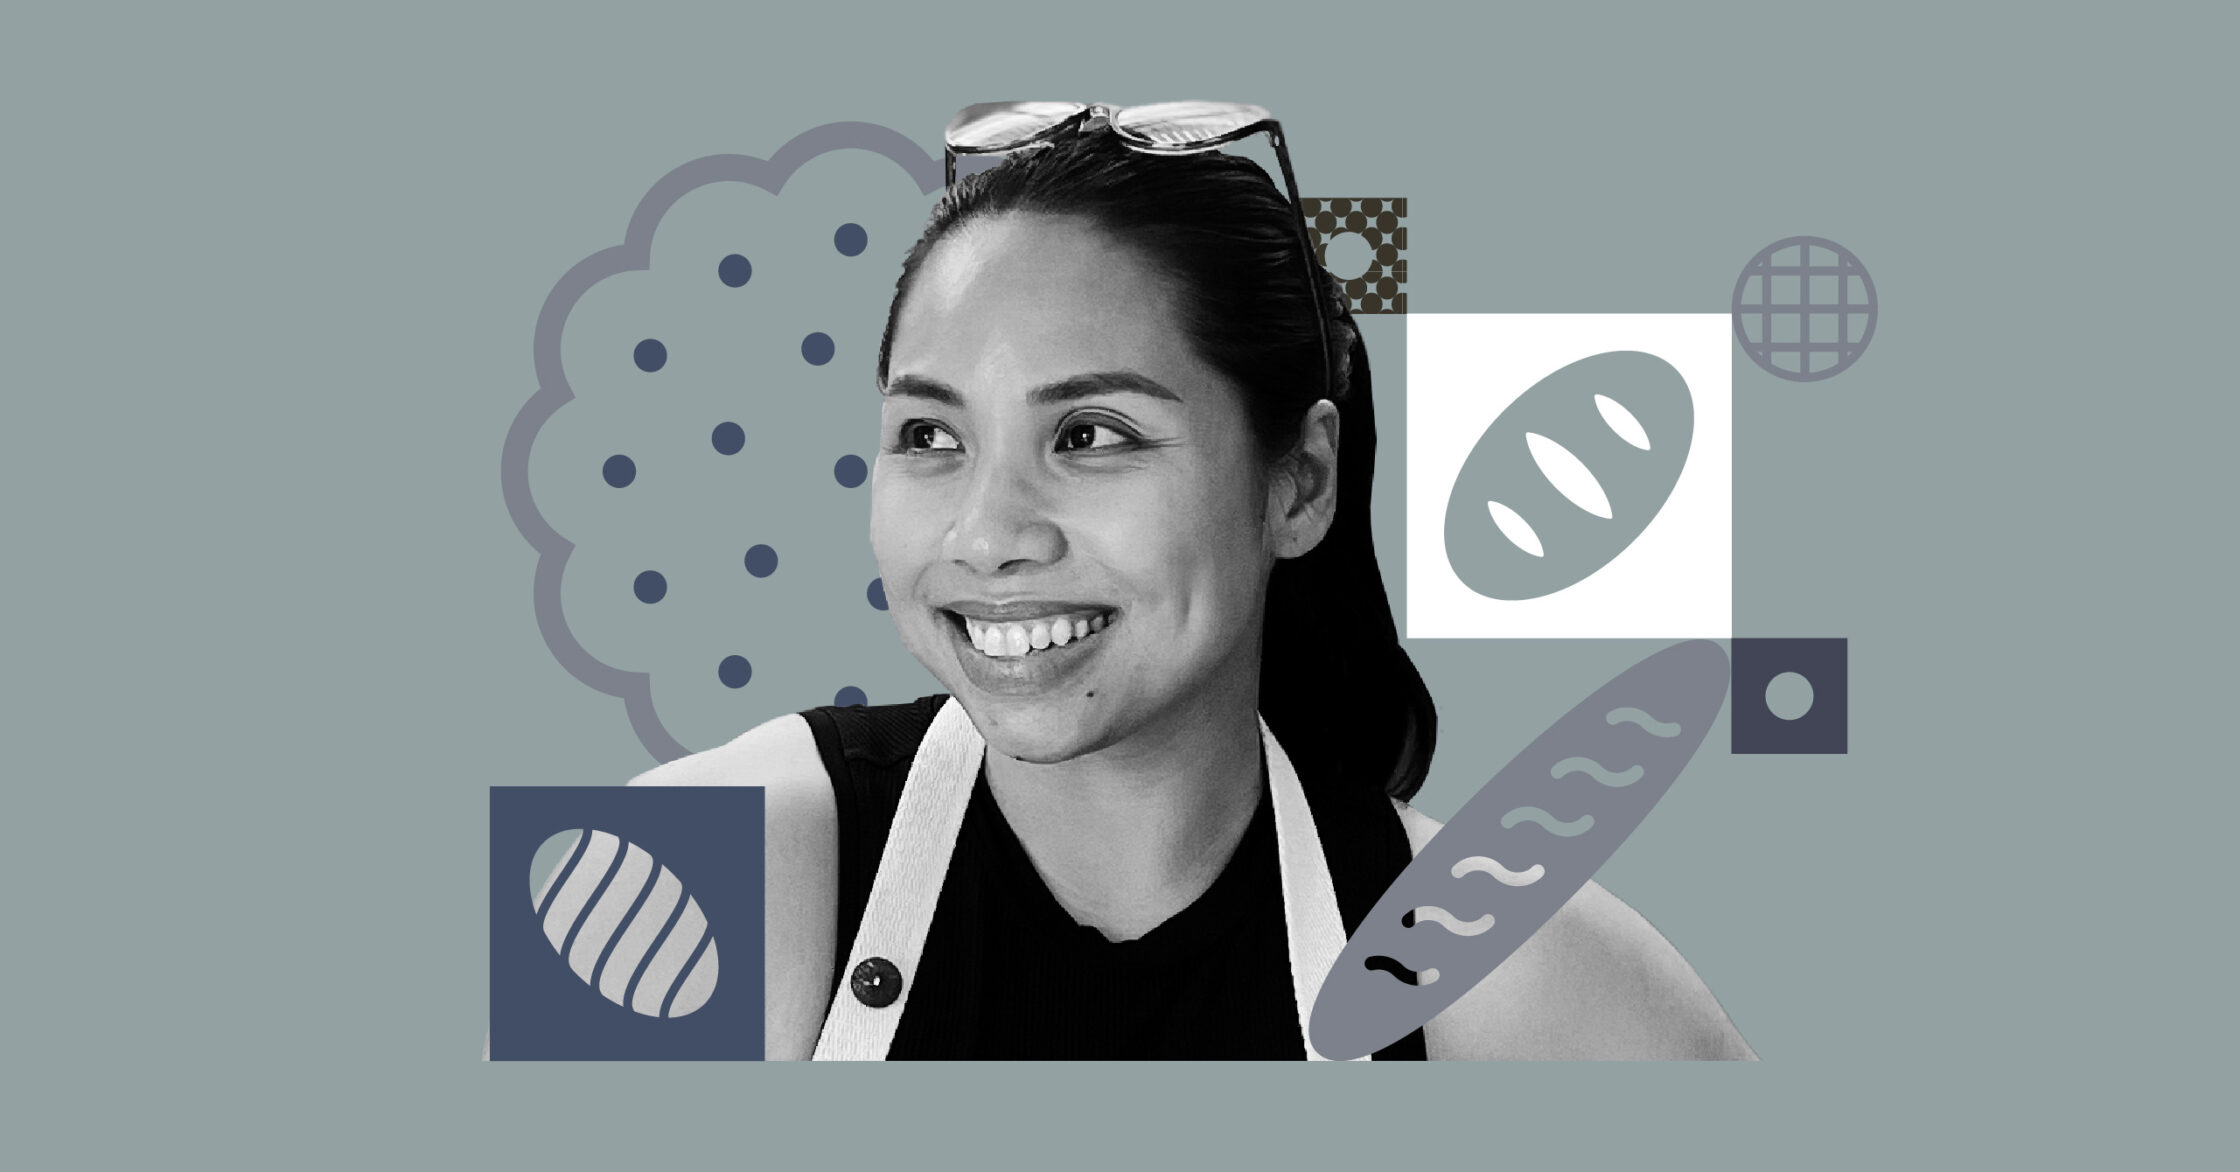 Apron Girl PH Len Ilagan-David shares how she started her baking business during the pandemic just four months after giving birth.